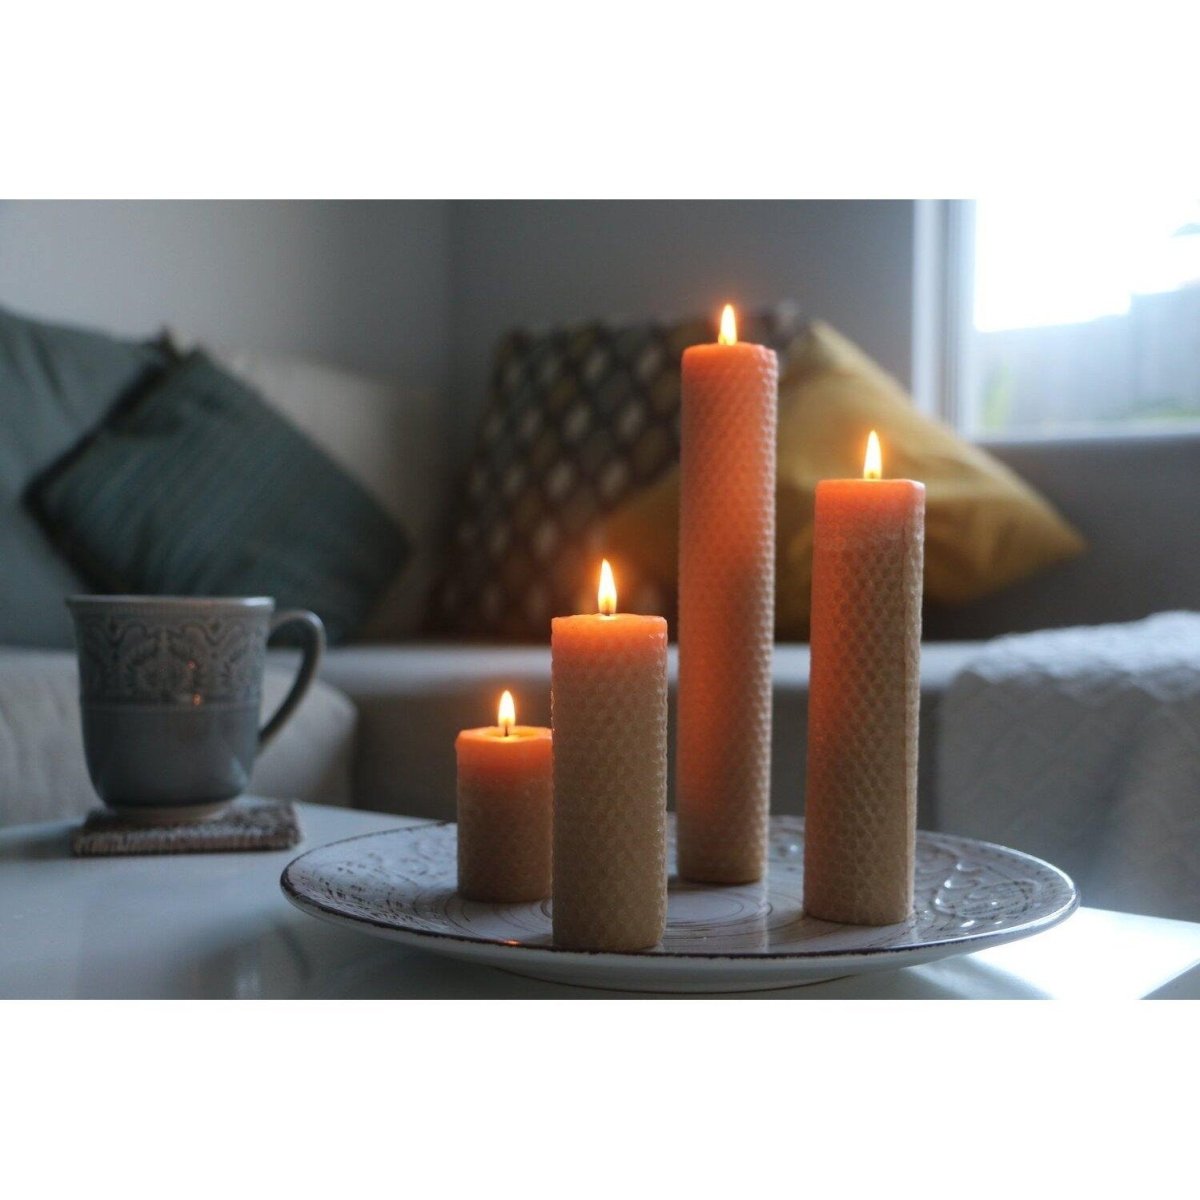 4 Piece Pillar Beeswax Candle Set, from the Chittering Candle Company - Urban Revolution